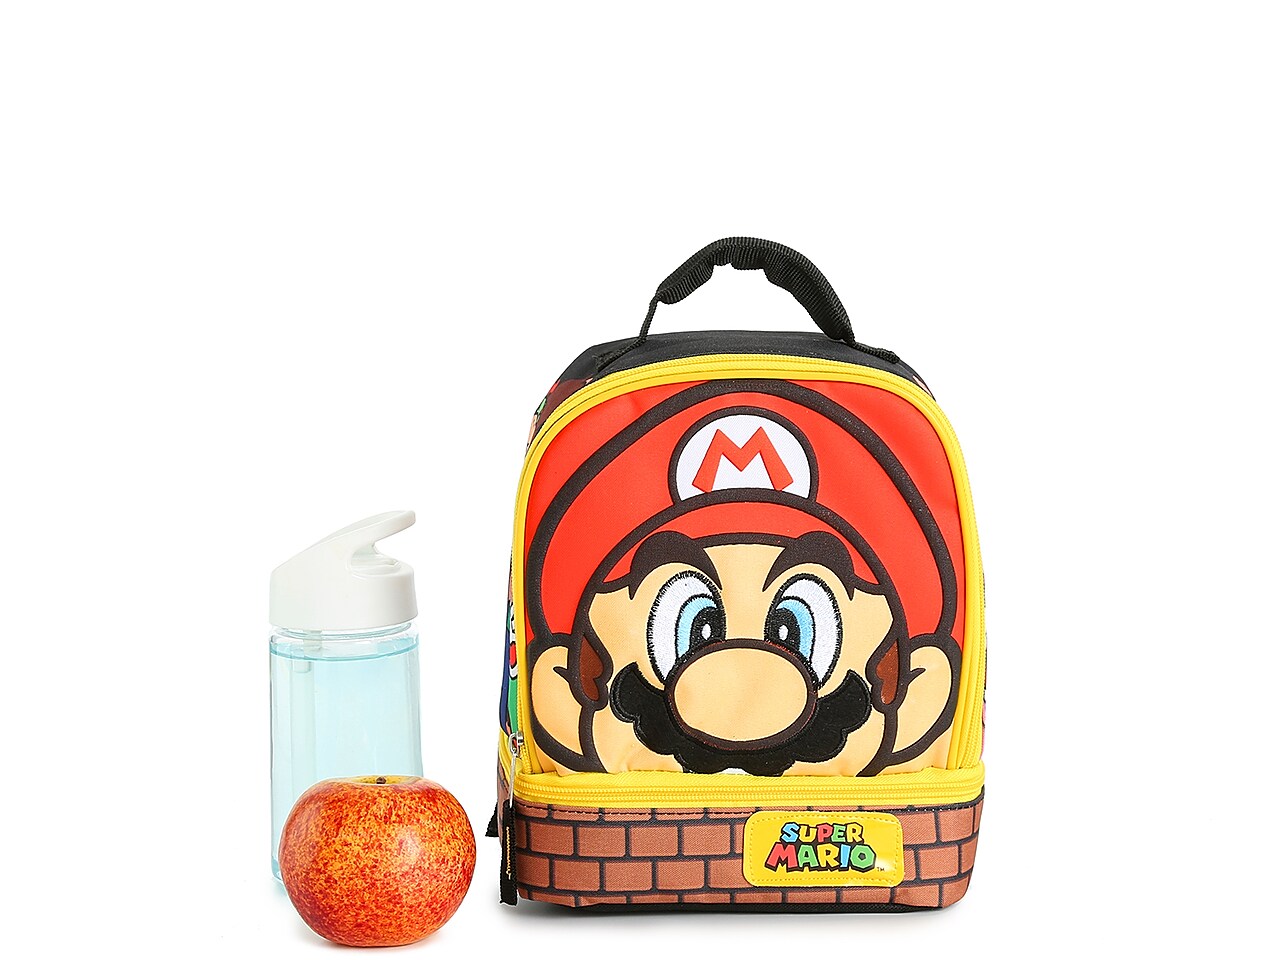 Super Mario Bros Boy's Girl's Soft Insulated School Lunch Box (One size, Red/Multi)